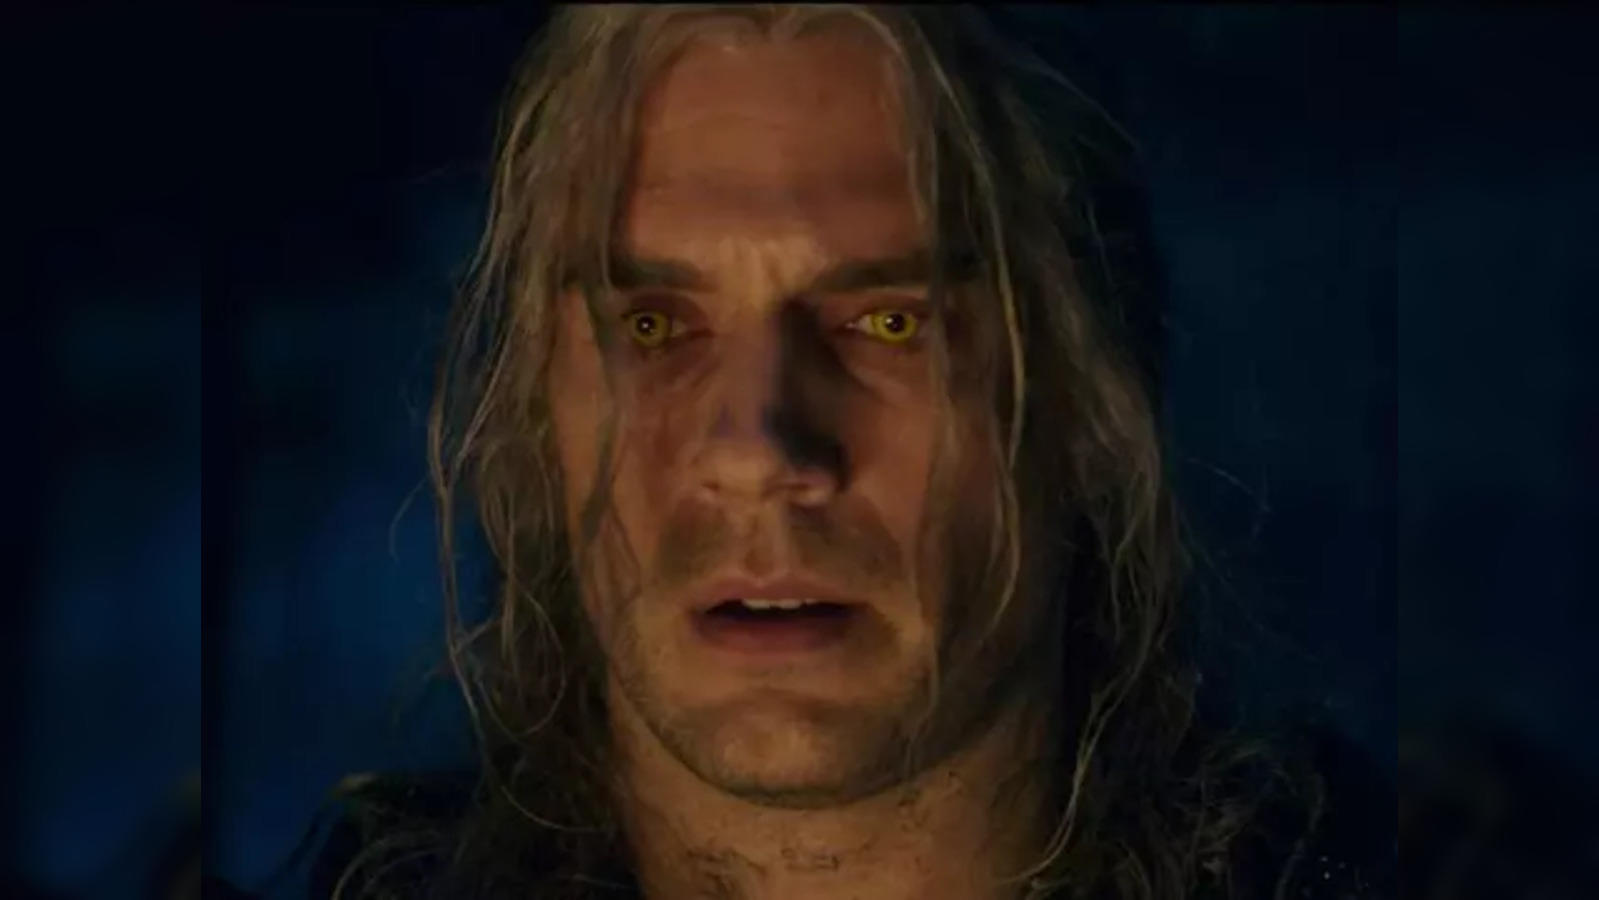 The Witcher: Find out how many Crores Henry Cavill earned from the popular  fantasy drama on Netflix